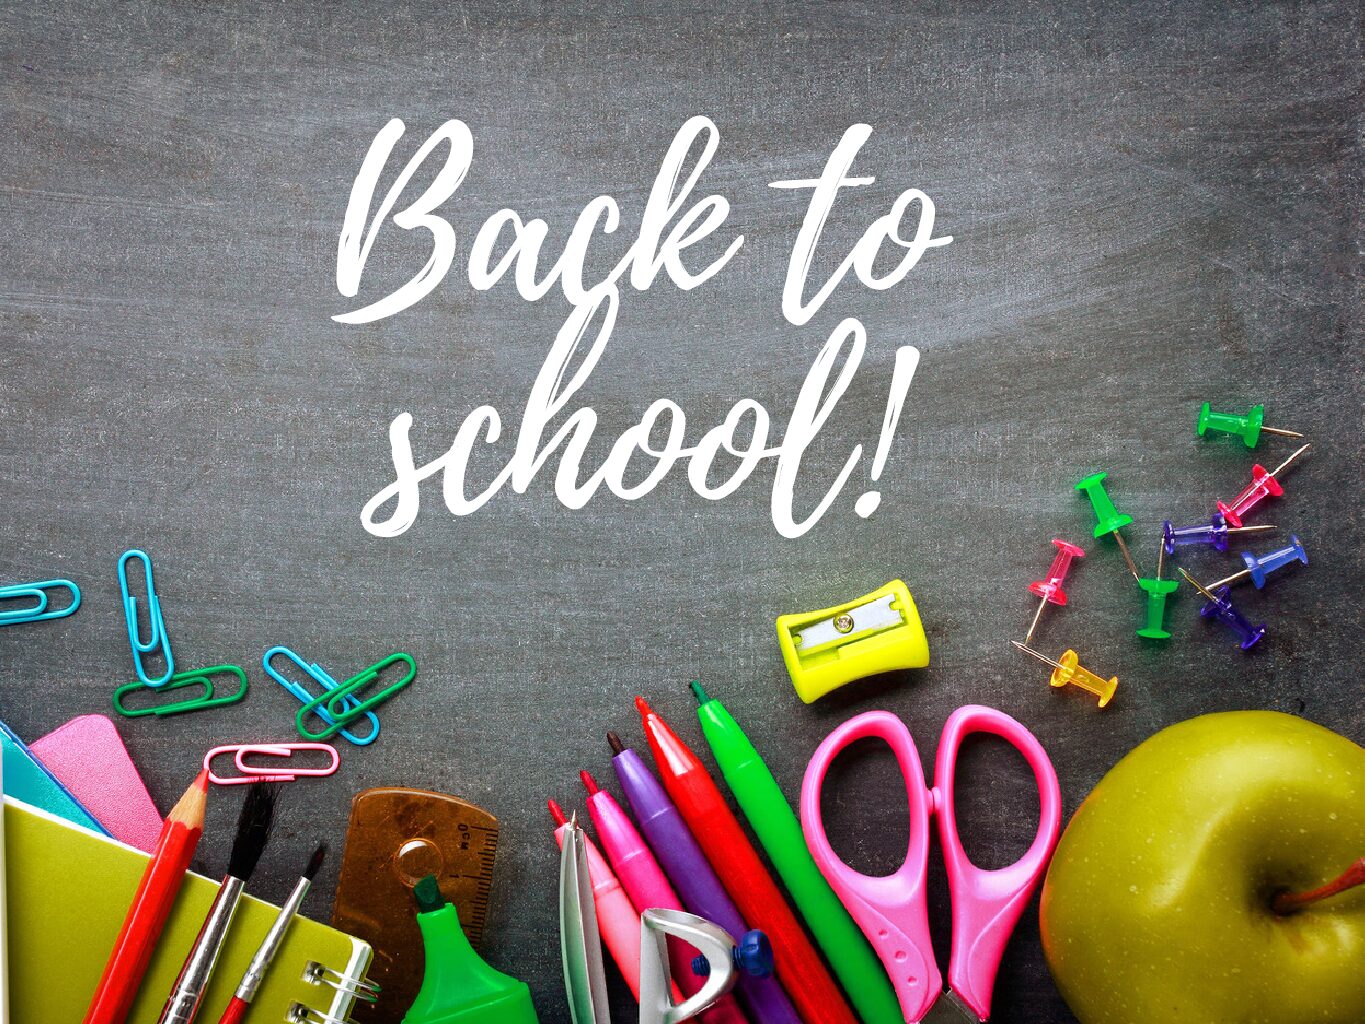 It’s time to go back to school!